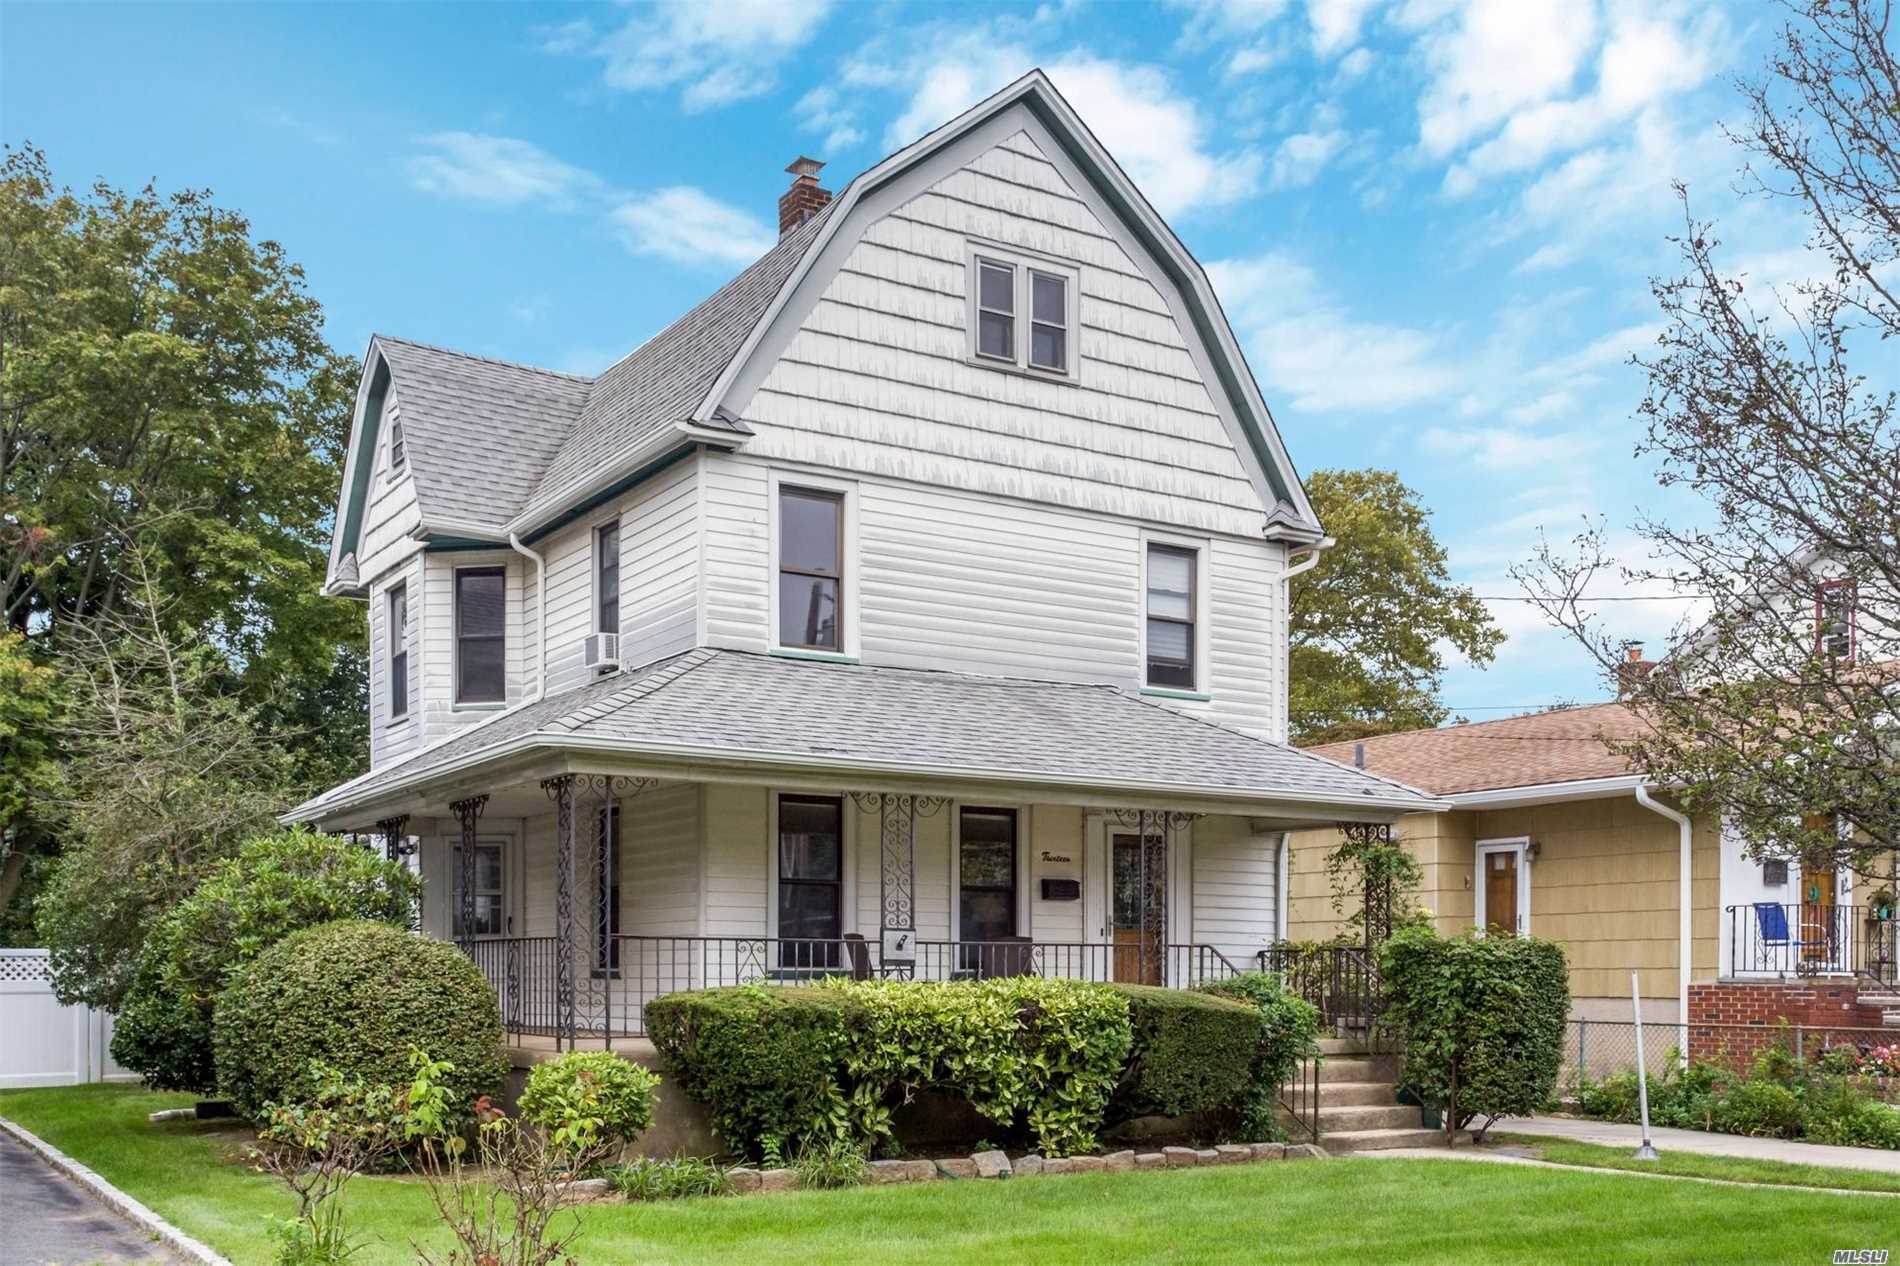 Dutch Colonial3Br Full Bath, Dbl Living Room, Formal Dining, Eat In Kitchen, Enclosed Porch On 1st Fl. Master Bedroom, Full Bath, 2Bedroom, Nursery/Office On 2nd Fl. Large Full Attc. Large Property W/2Car Garage... Must See Will Sell Fast!